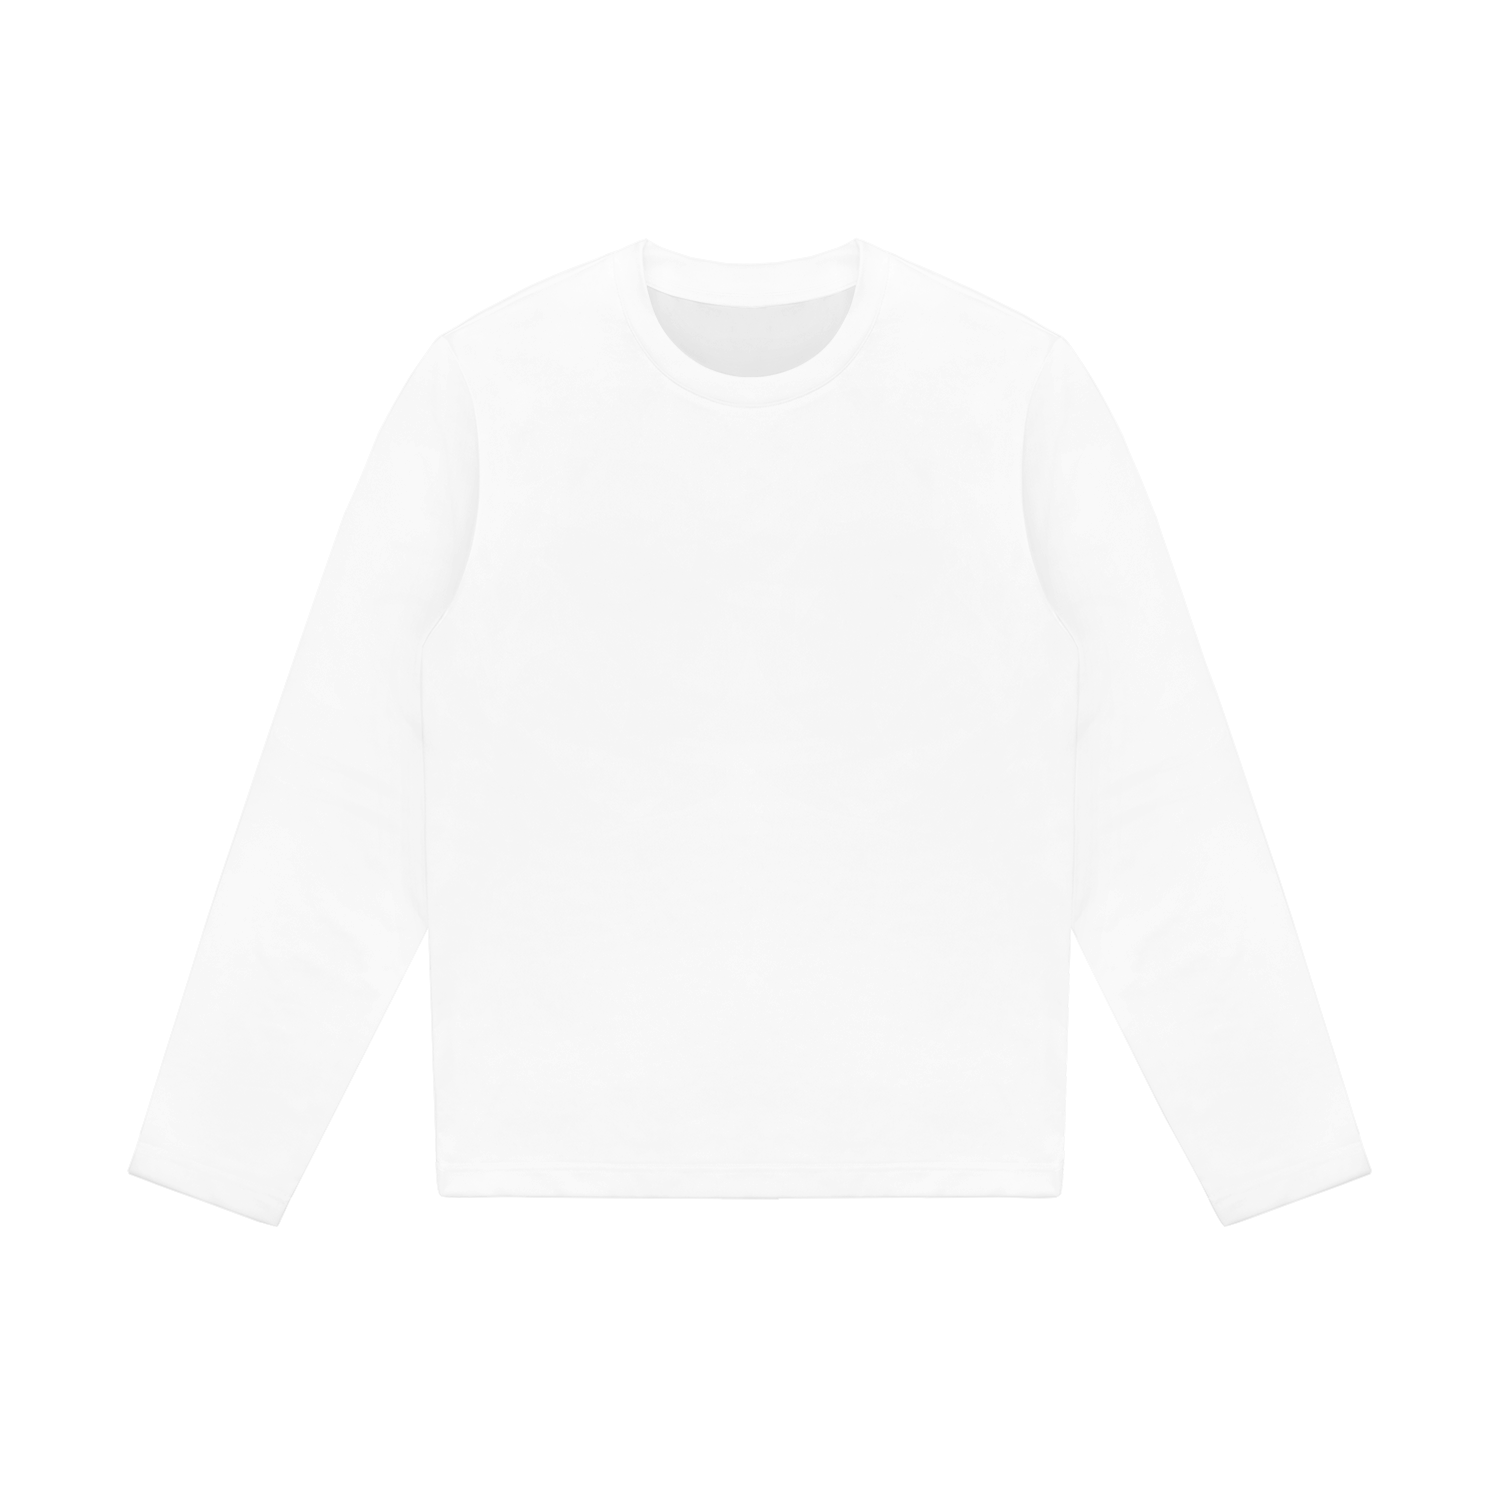 All-Over Print Unisex Quick Dry Long Sleeve Tee | HugePOD-2